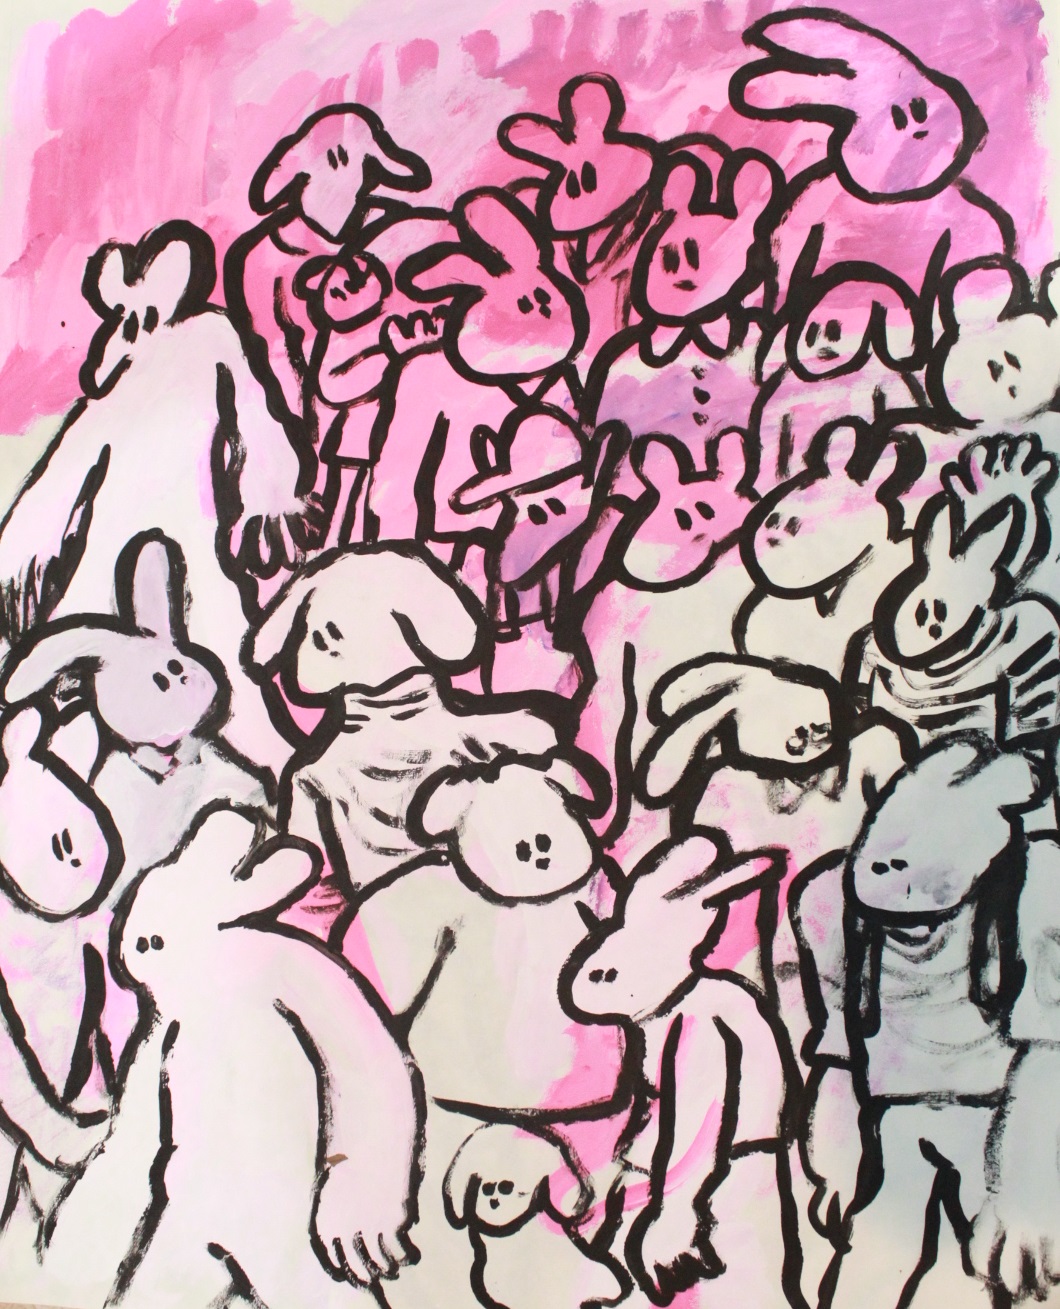 pink crowd 2, 2019. acrylic on paper.